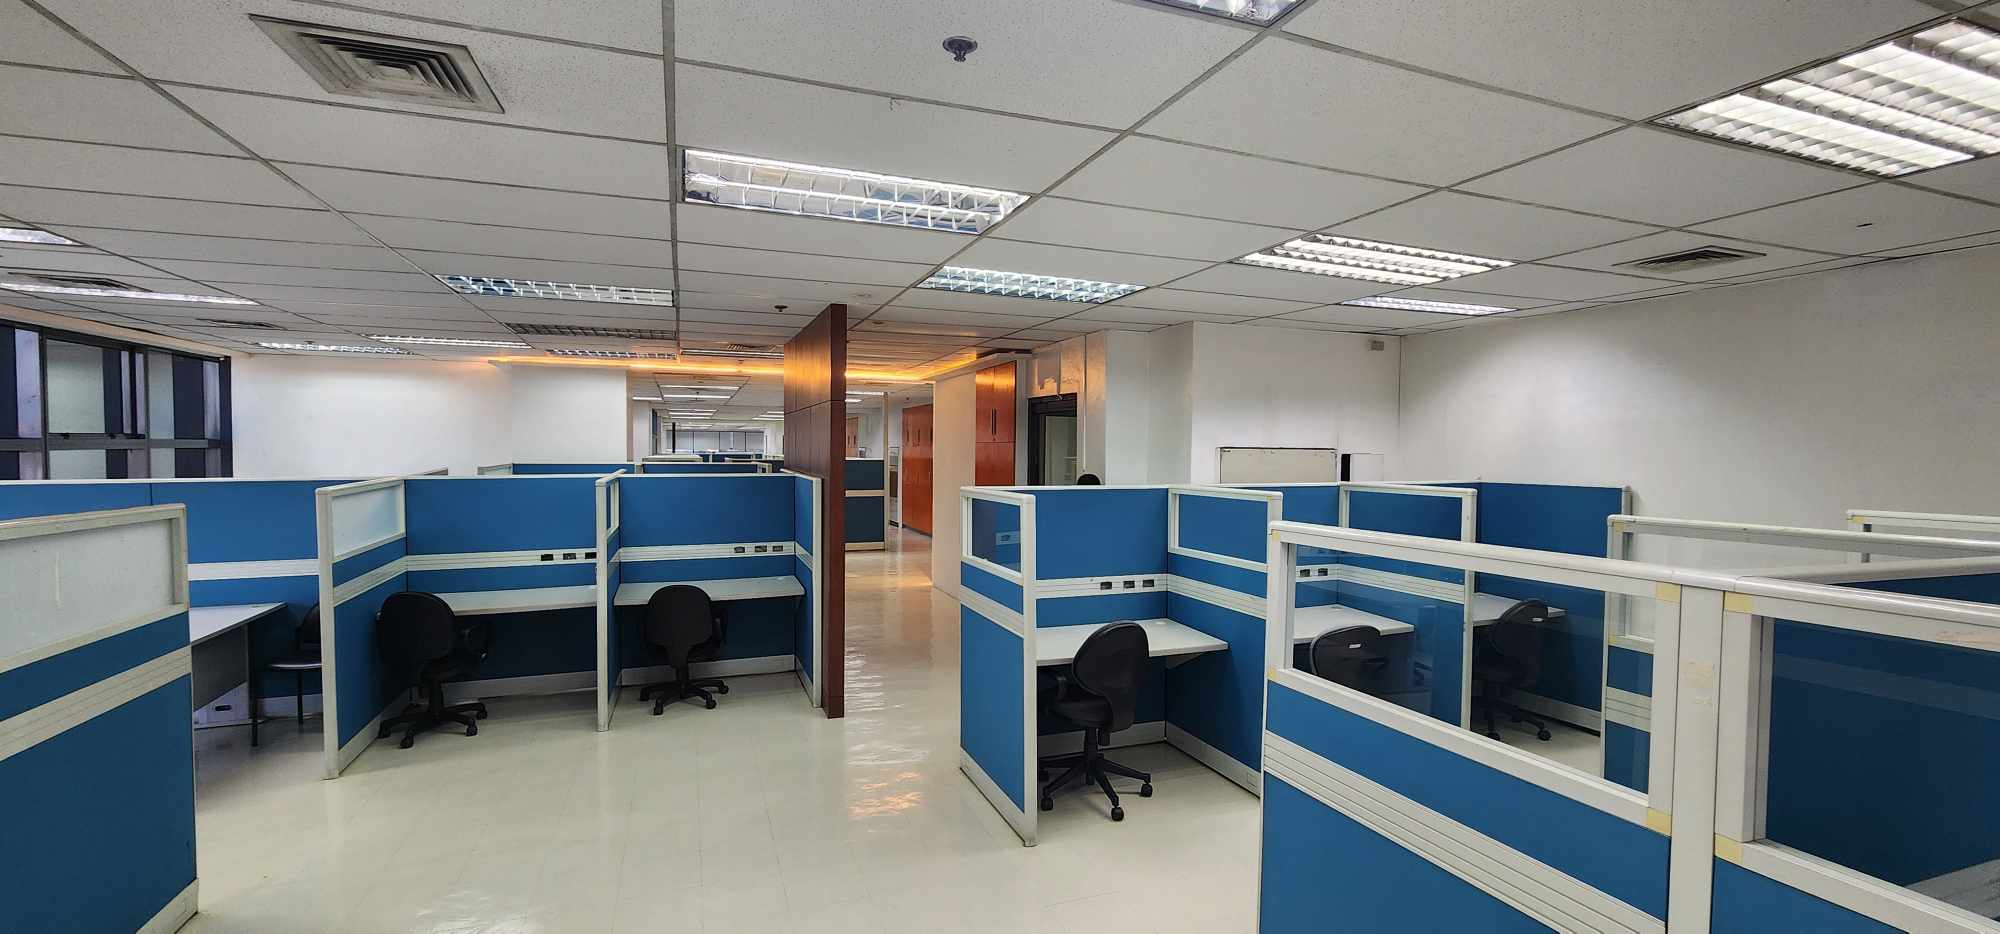 Ortigas Fully Furnished Fitted Office Space for Sale or Lease